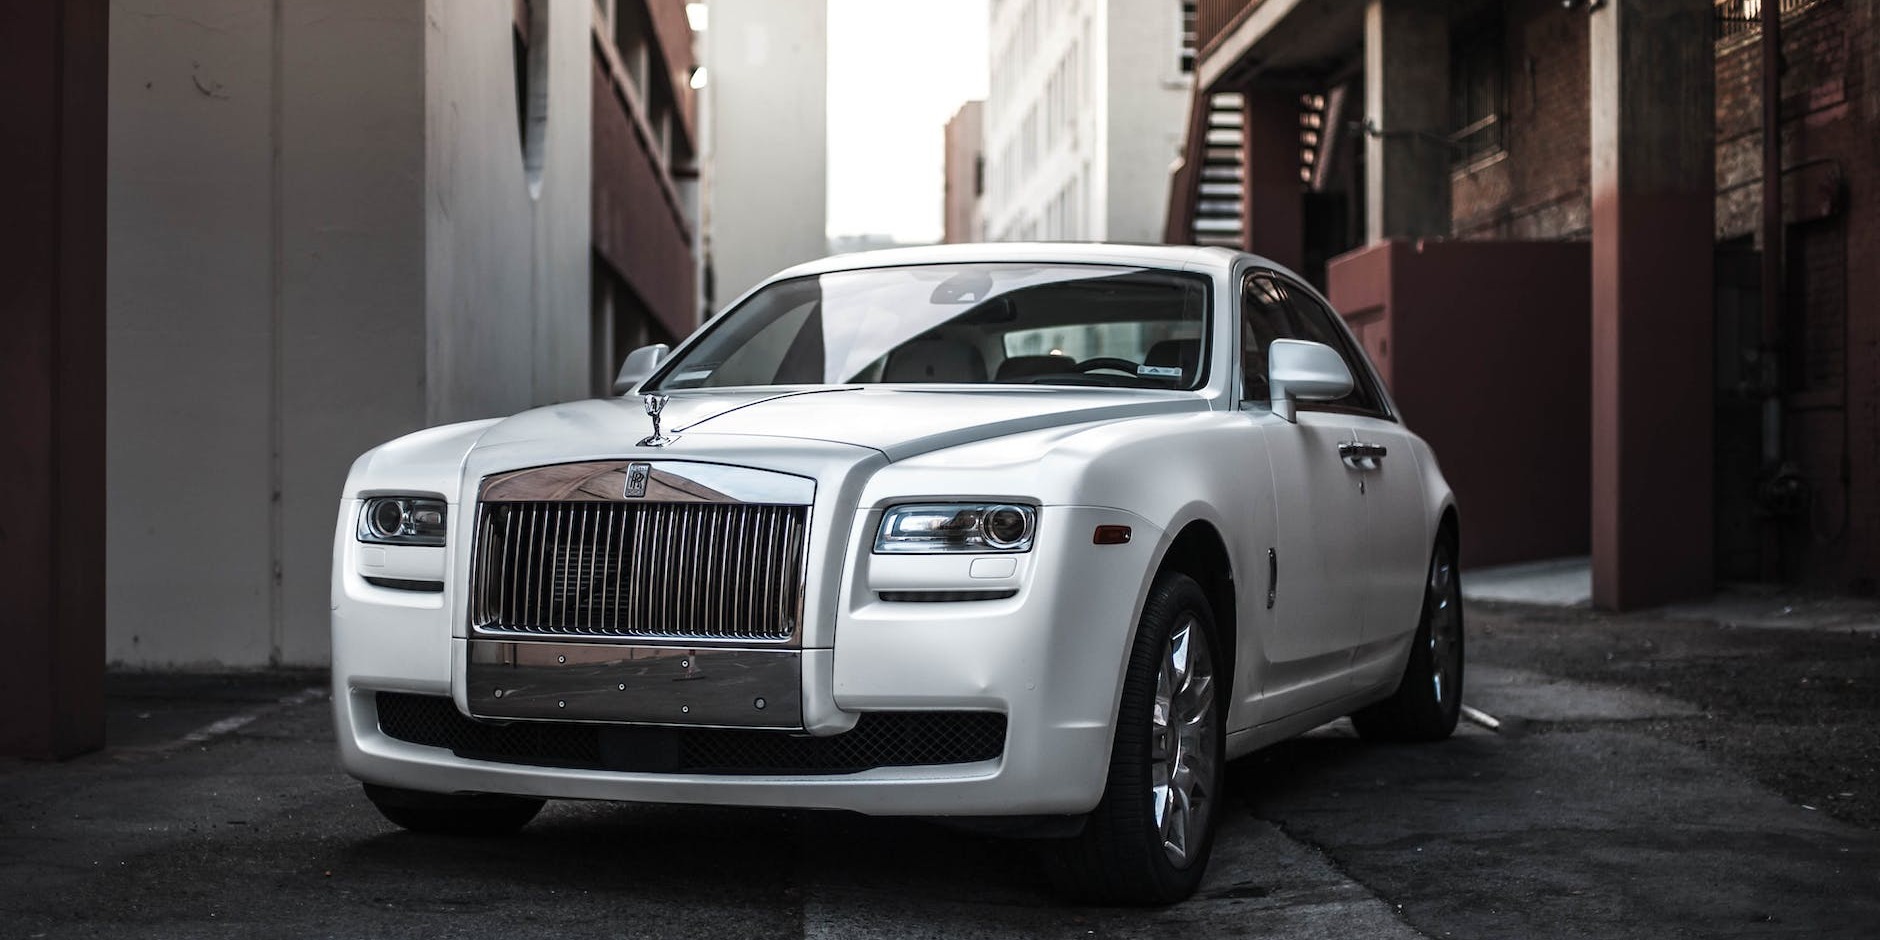 Why the Rolls Royce Dawn is the Ultimate Luxury Car for Your Southampton Wedding